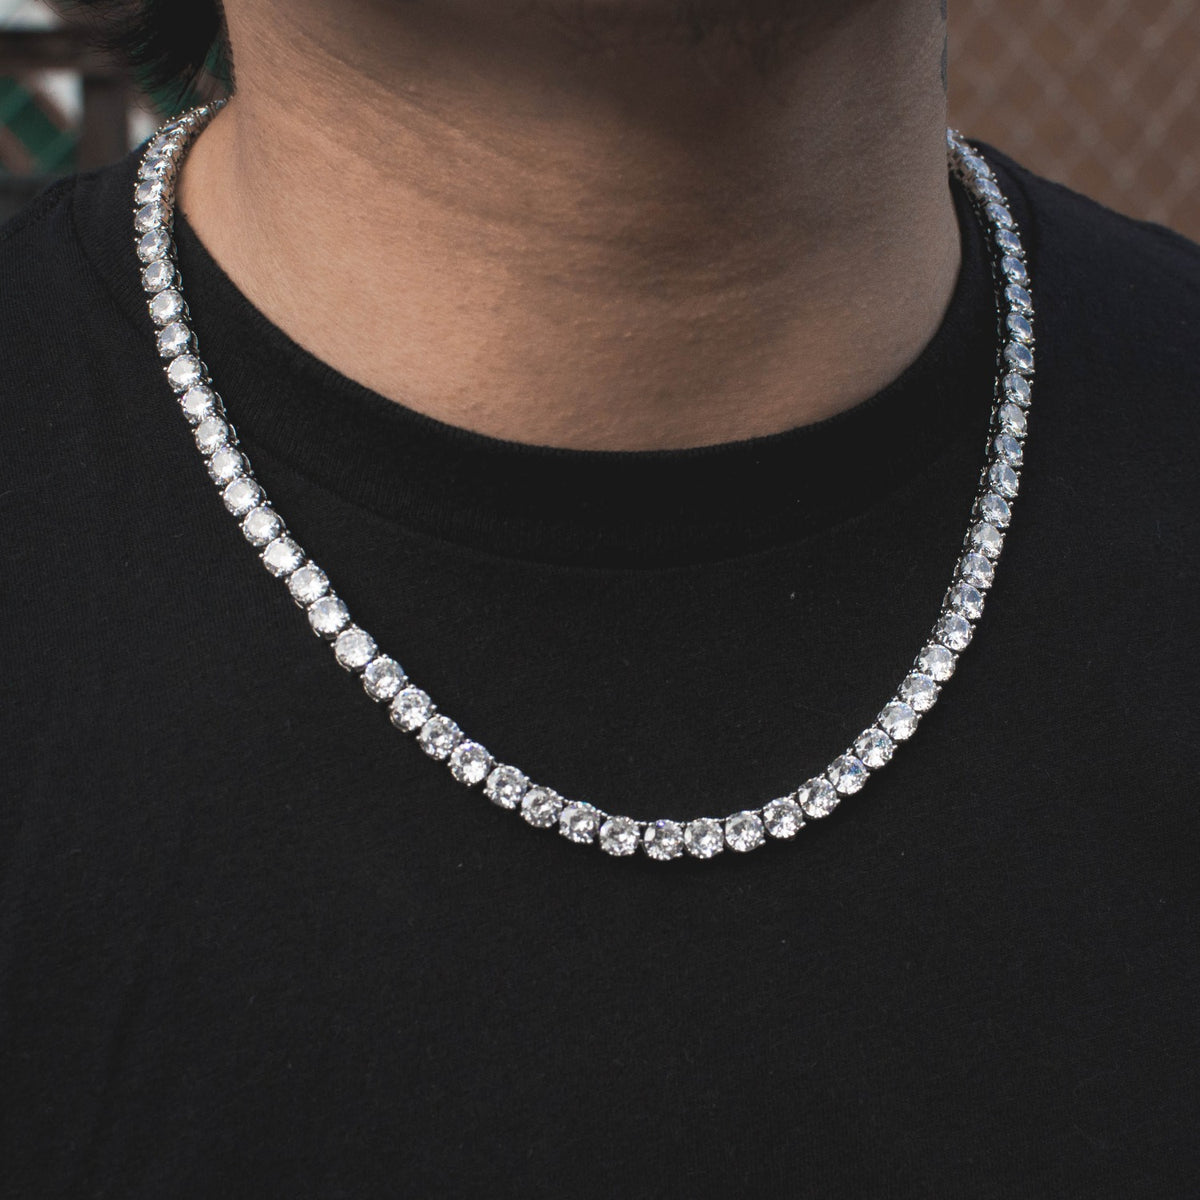 Diamond Tennis Chain Choker Necklace in White Gold - The Jewelry Plug